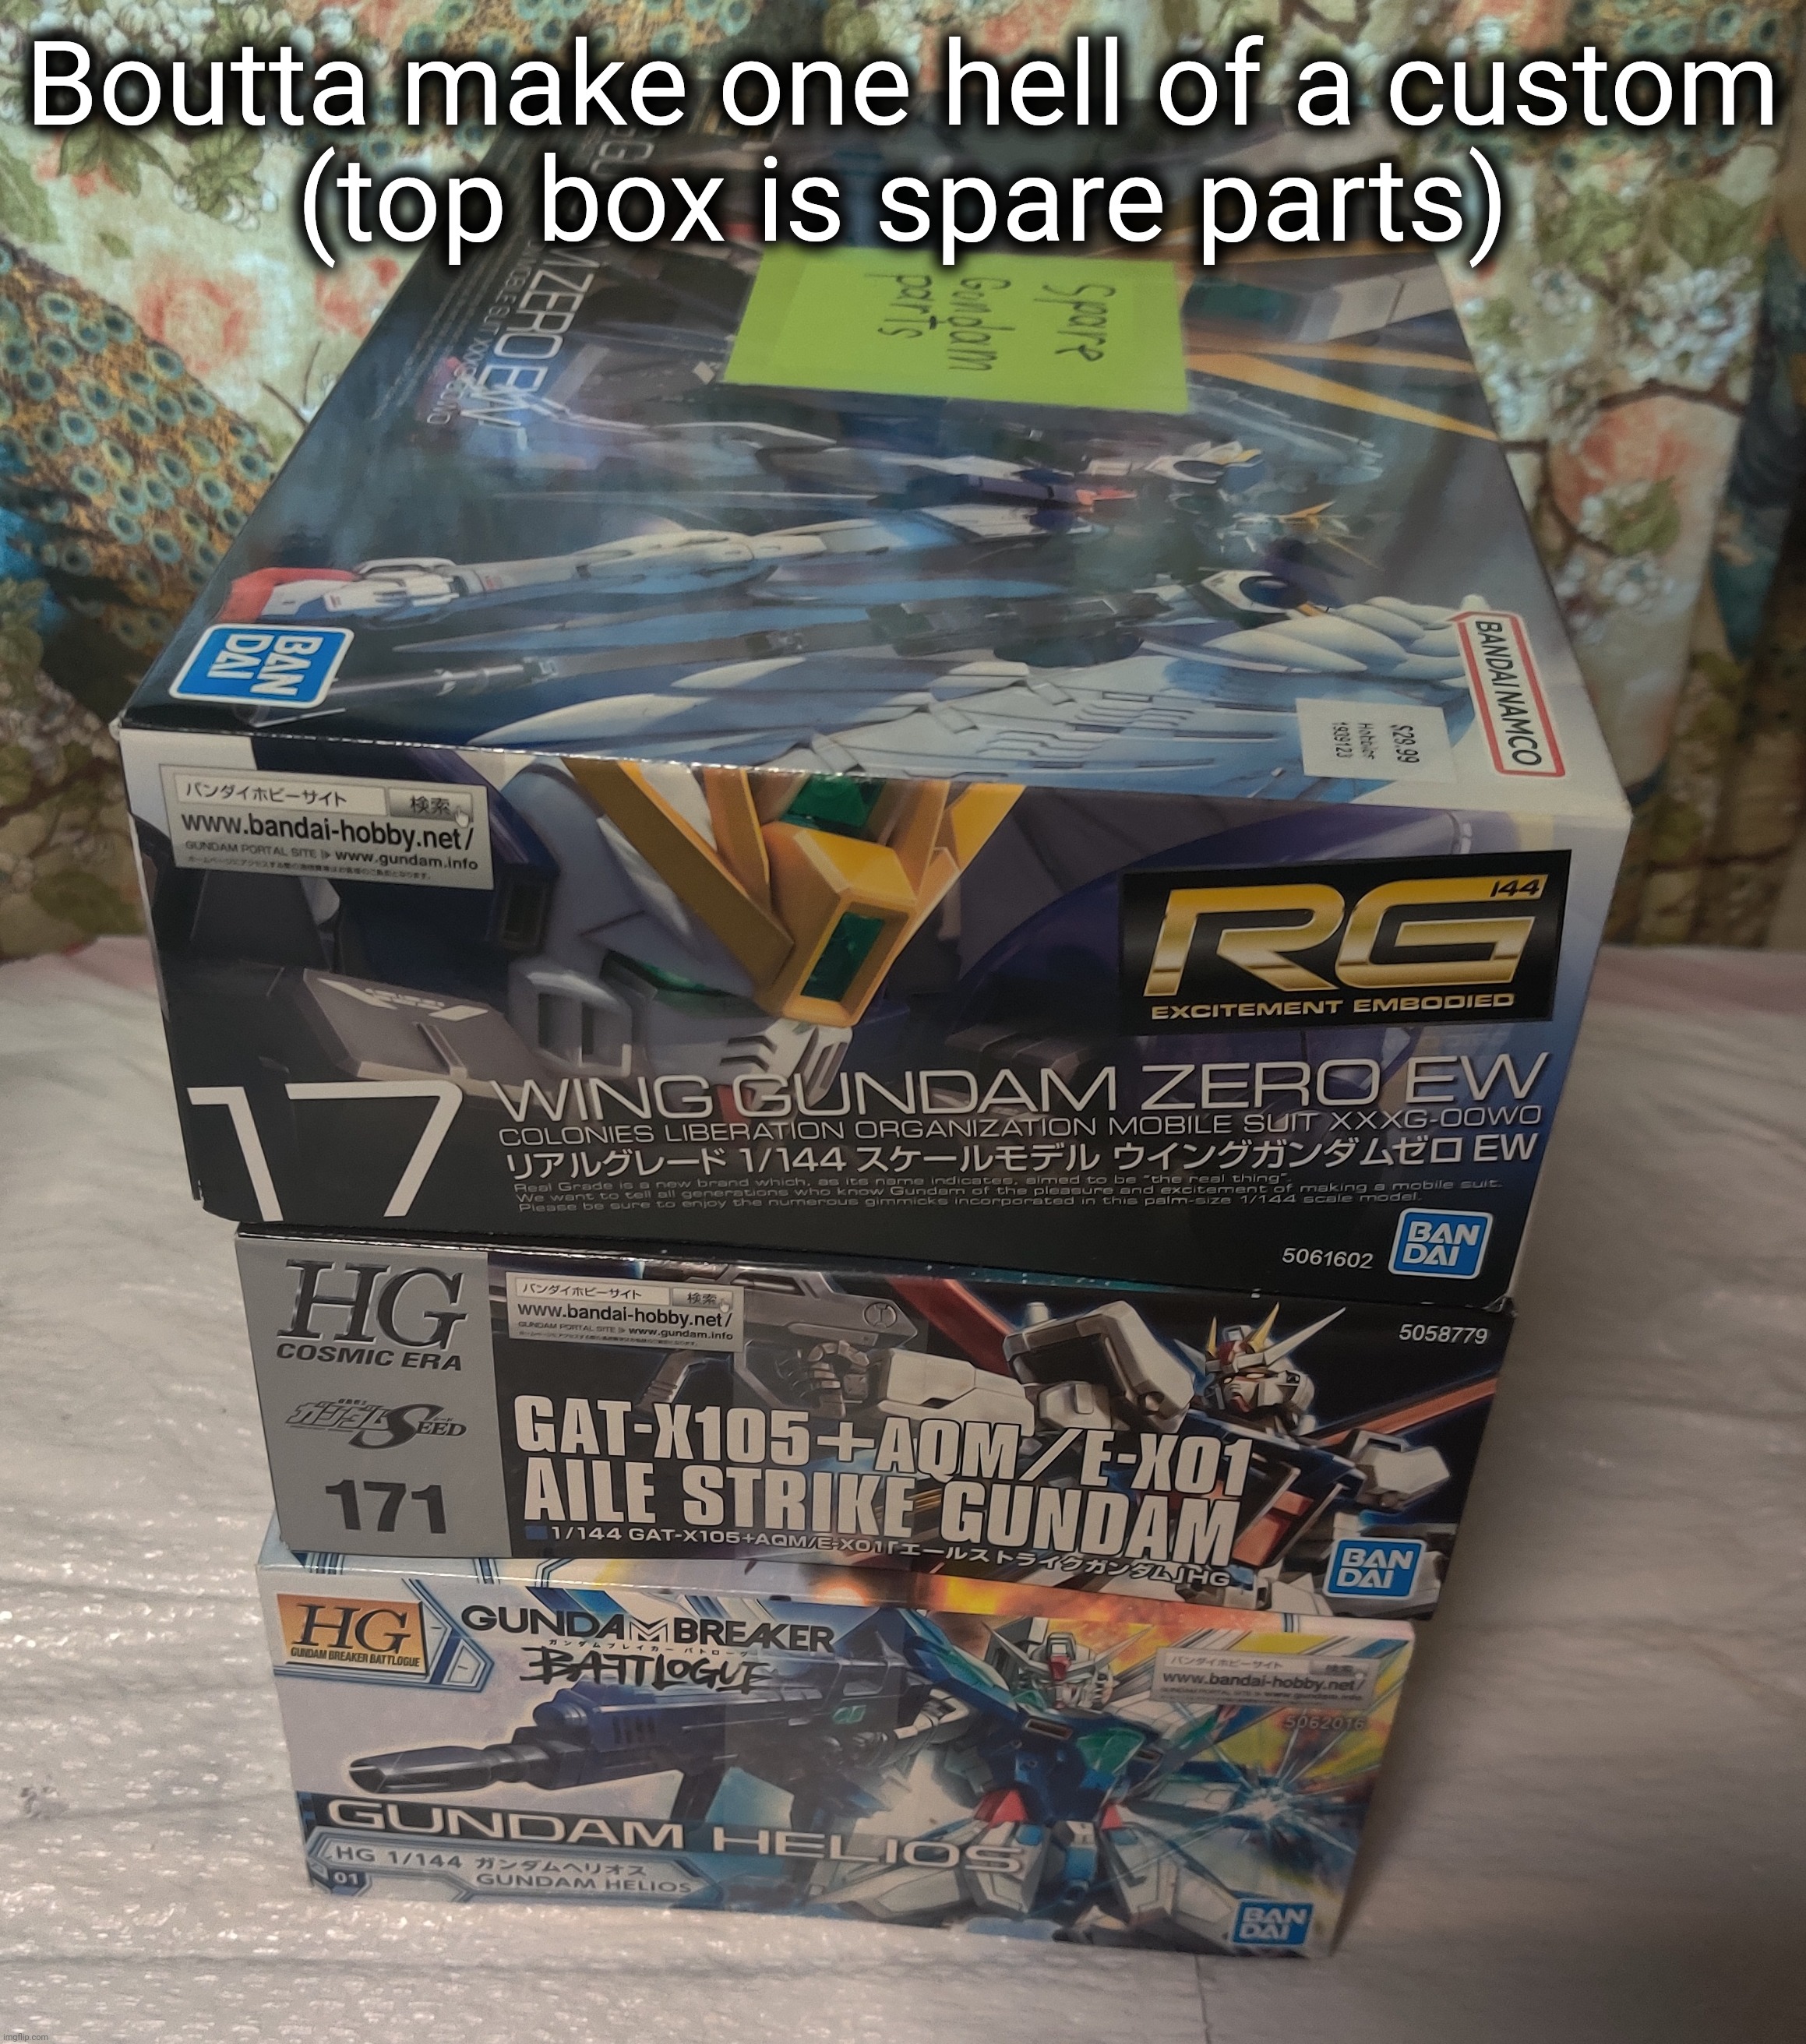 I would've started on the other one by now but the kits for this got here first :P | Boutta make one hell of a custom
(top box is spare parts) | made w/ Imgflip meme maker